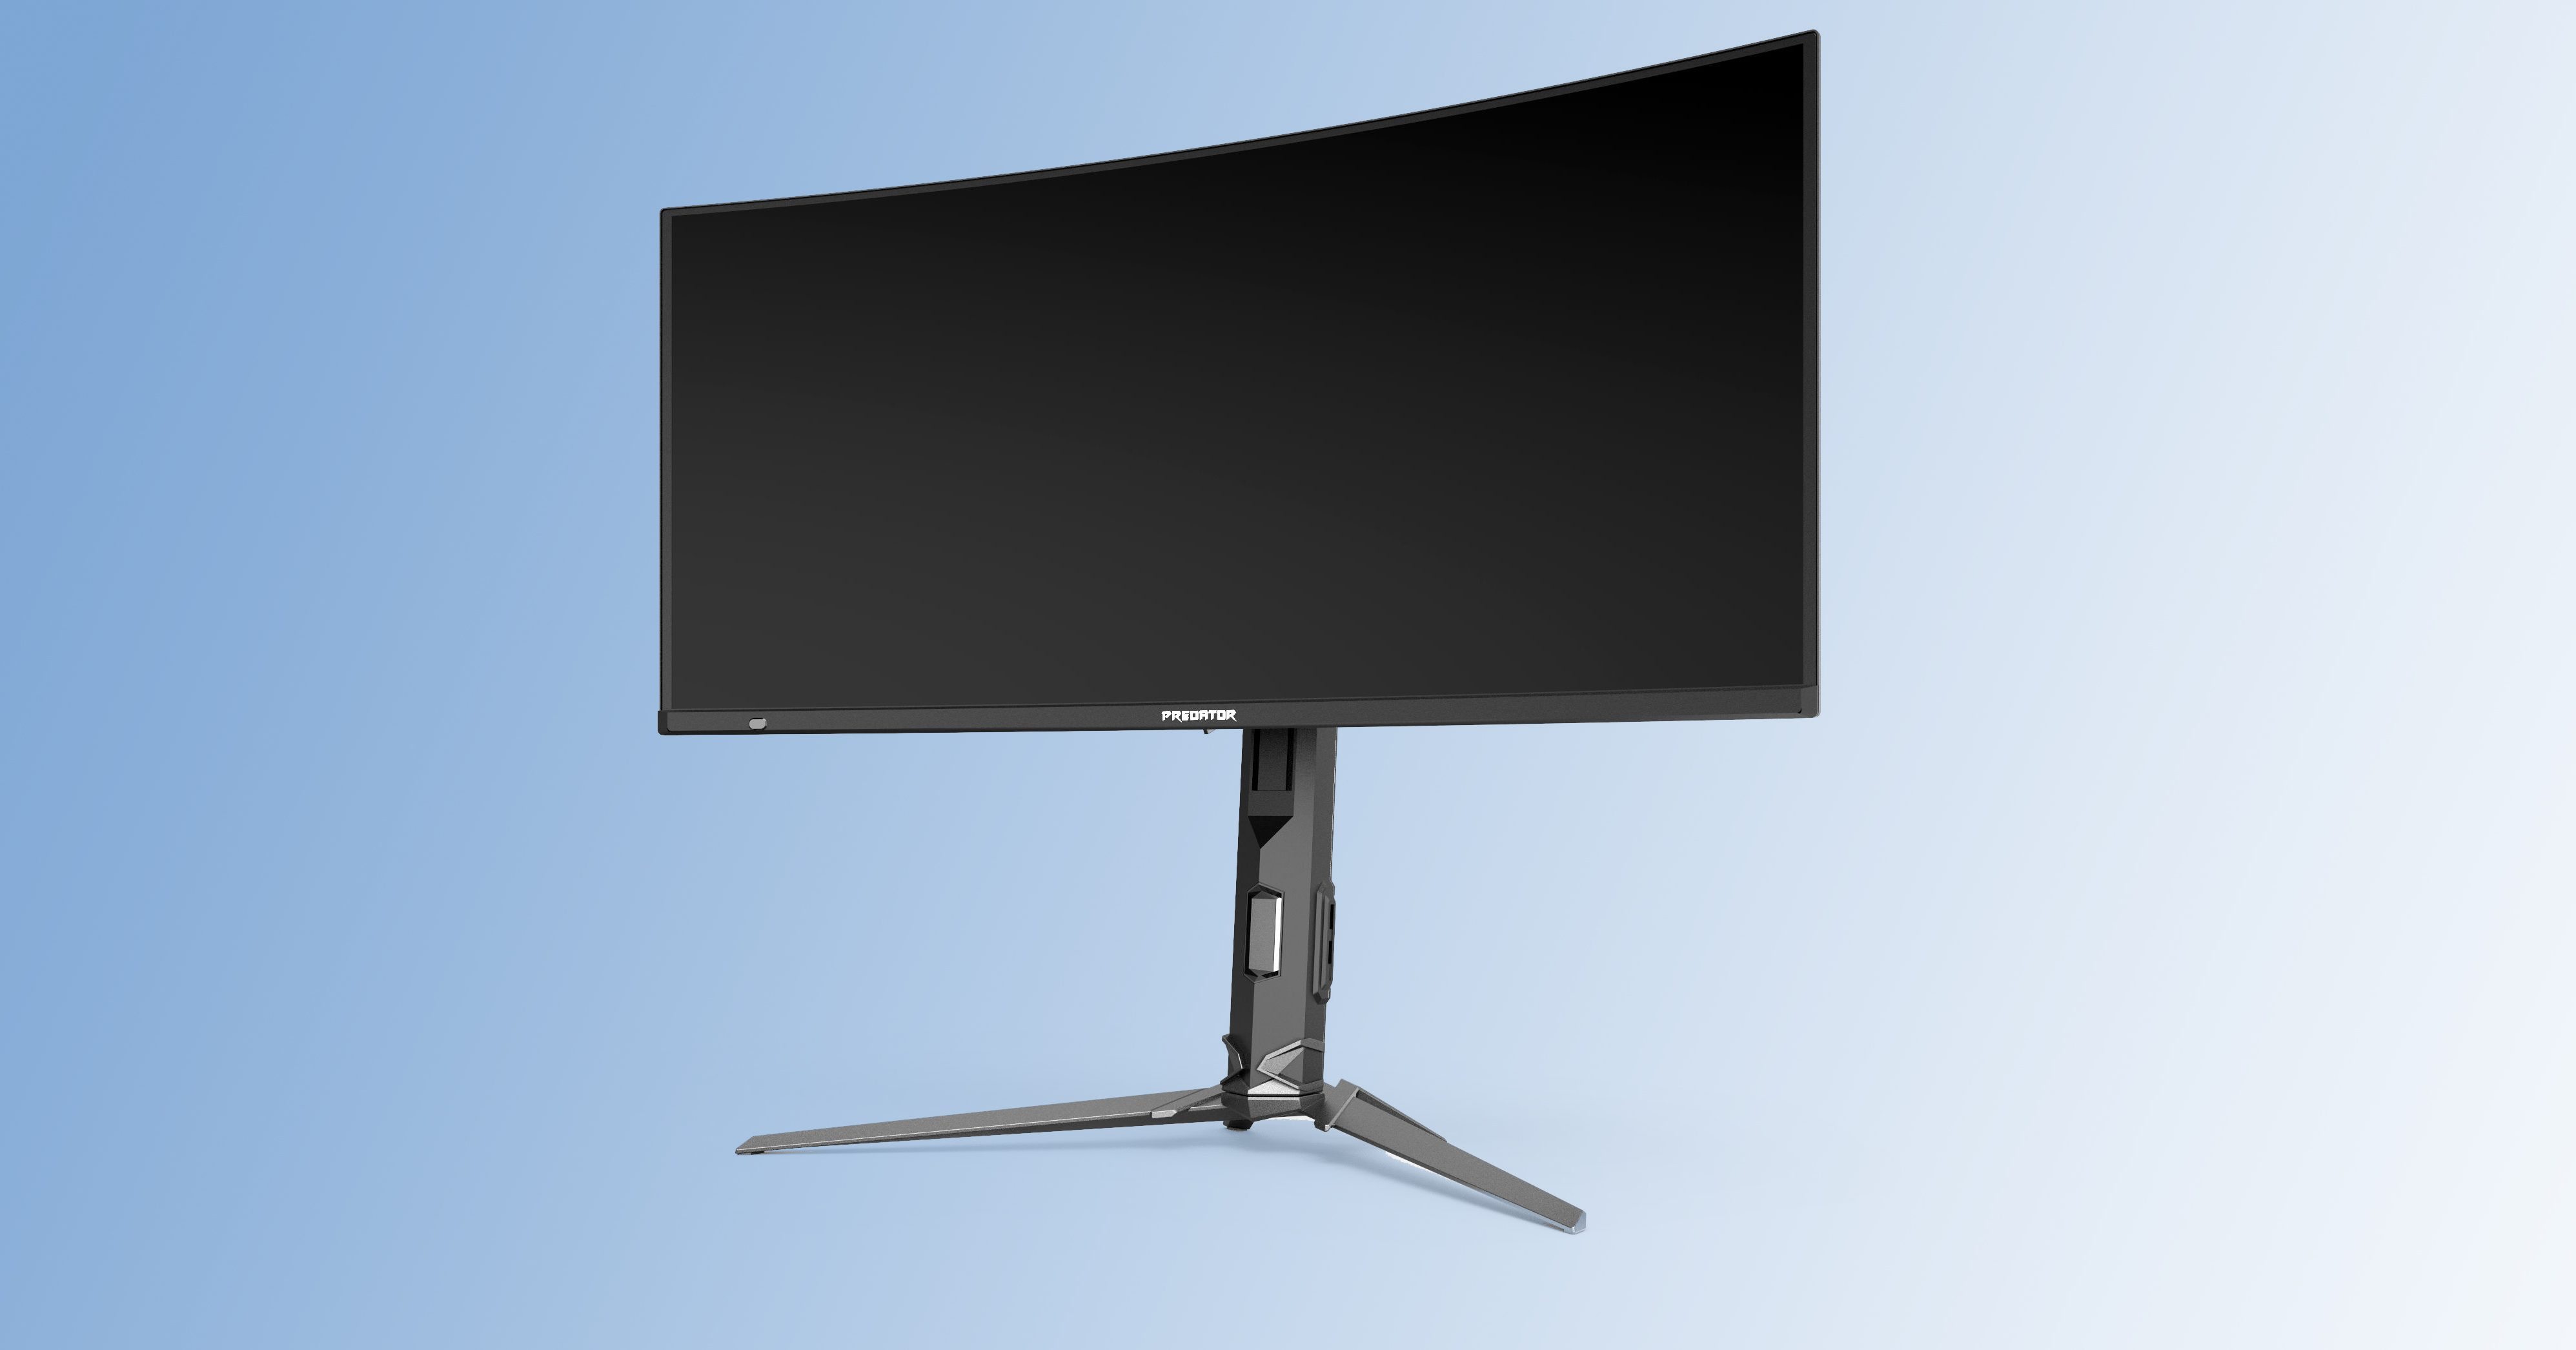 The Acer Predator X34 X5 monitor over a light blue background.